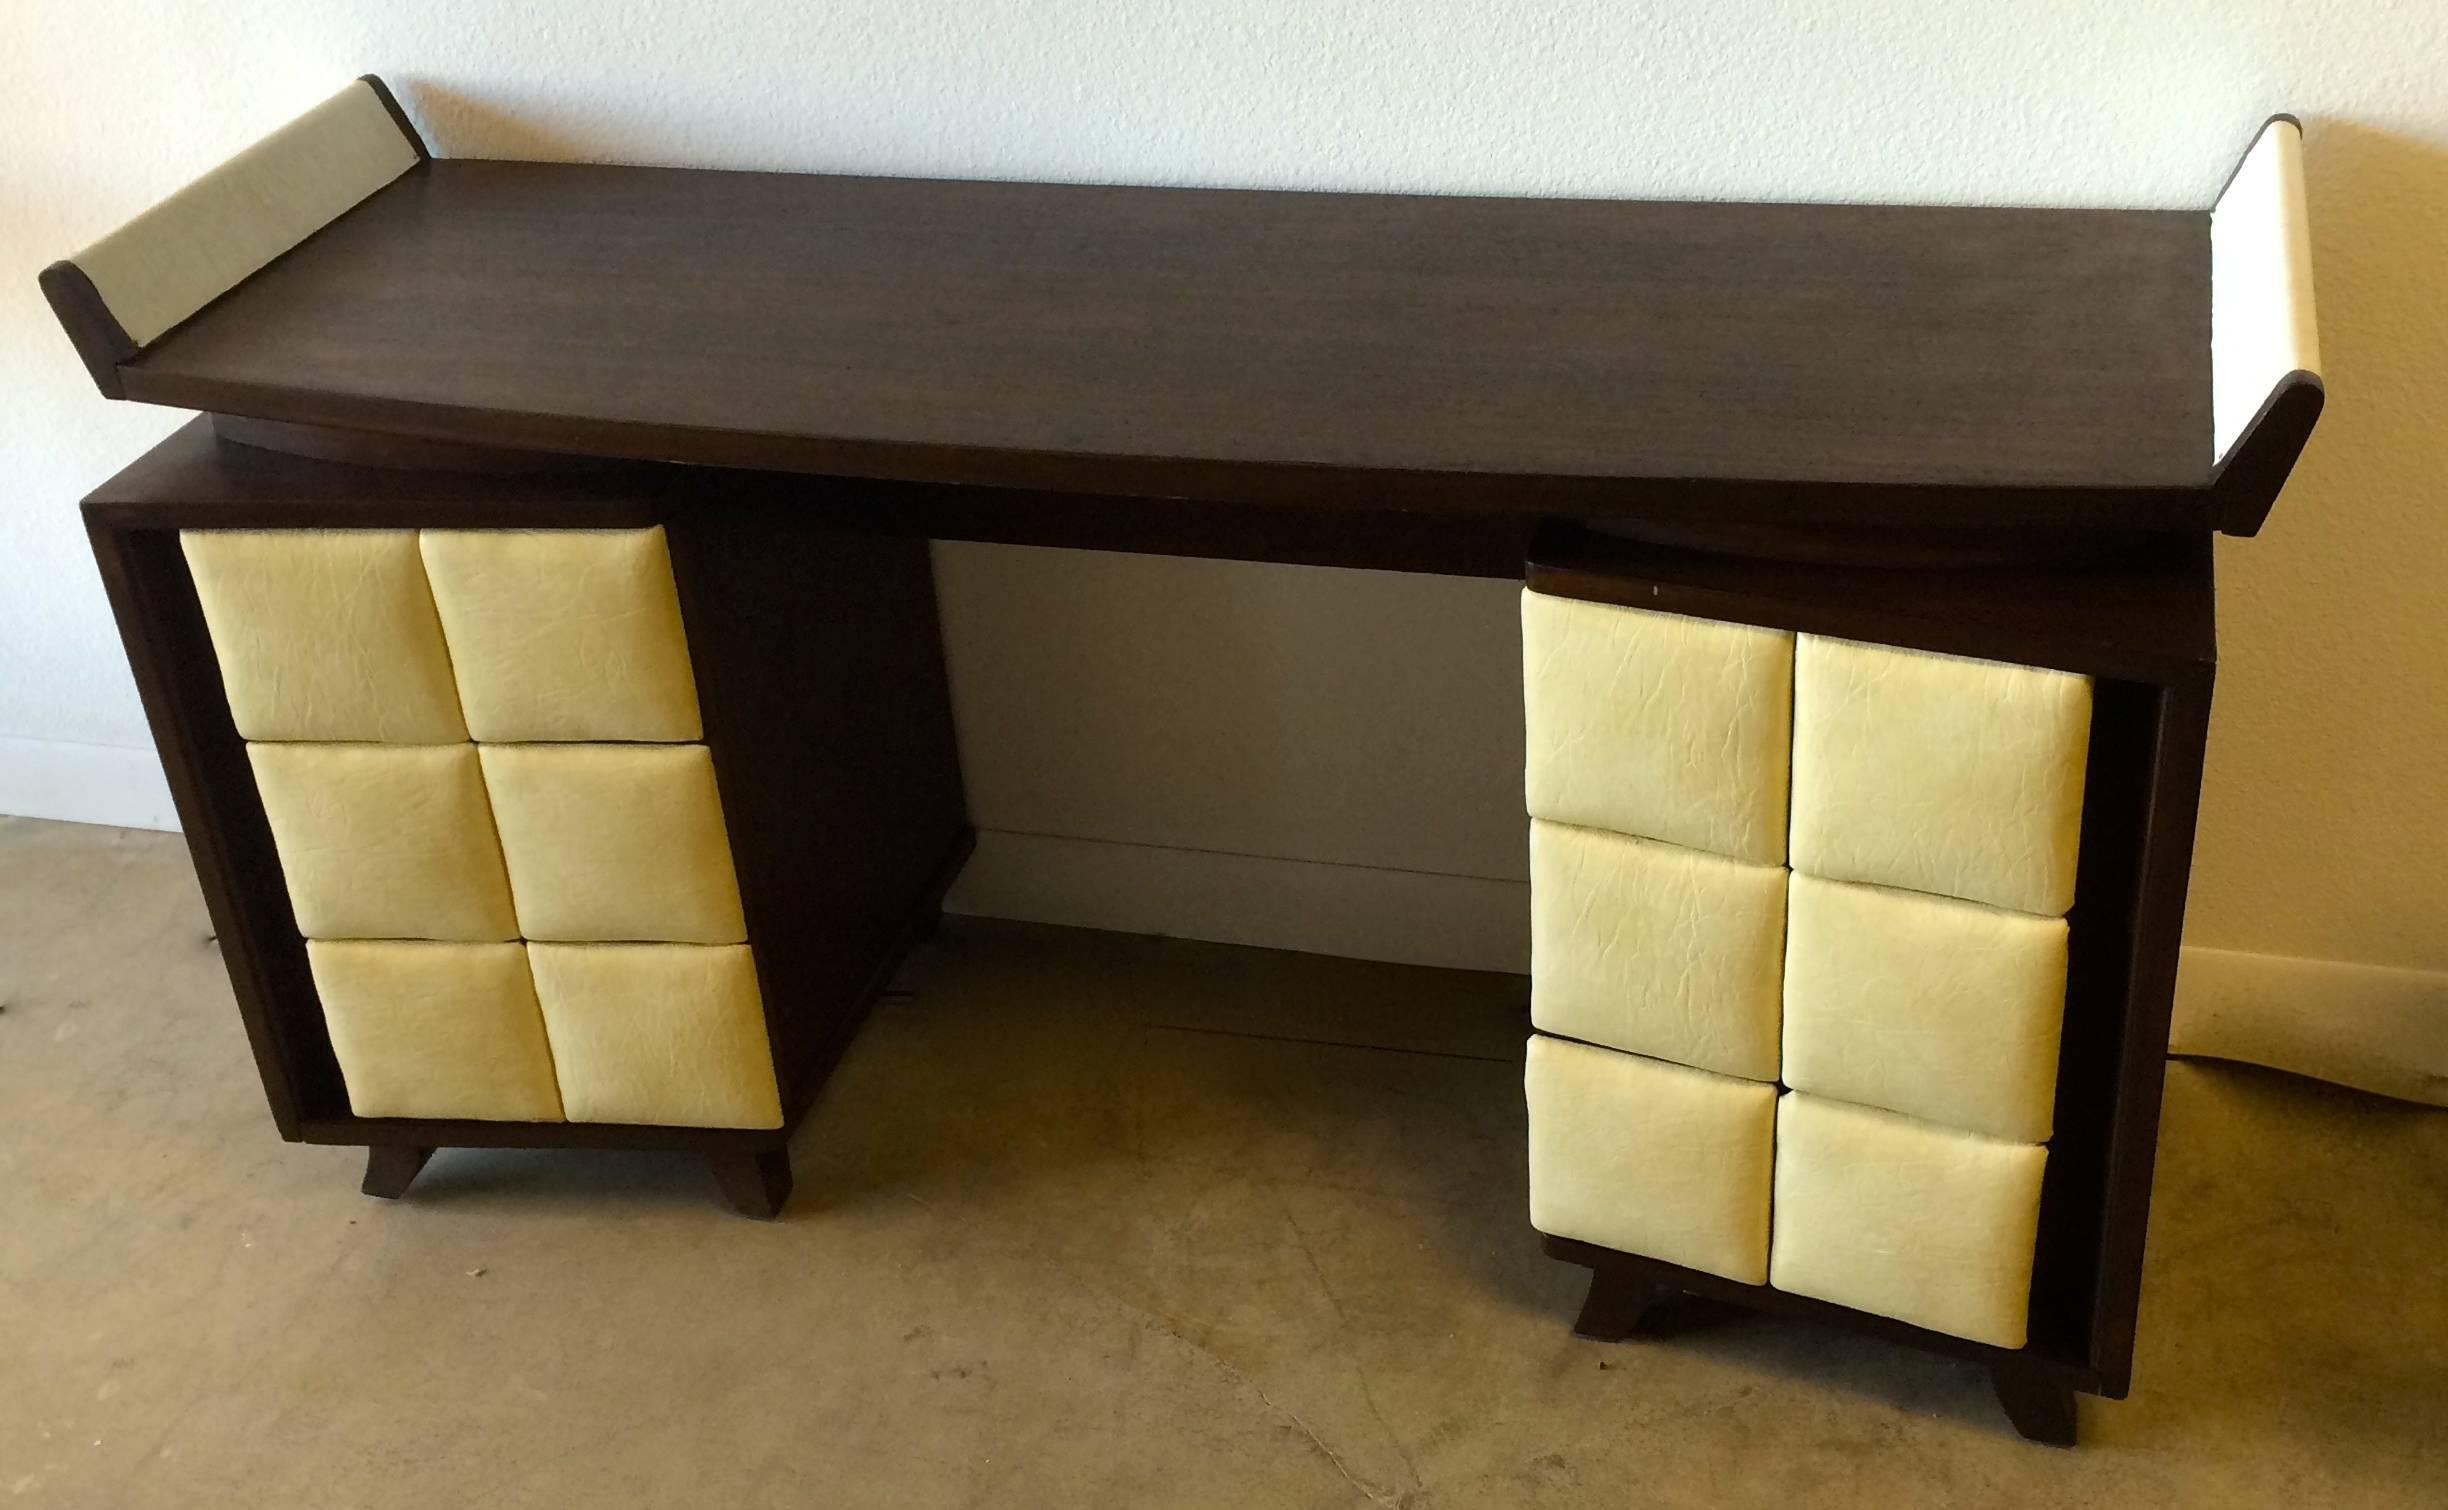 This desk designed by Gilbert Rohde was part of a series of Rohde-designed case goods released by Herman Miller in 1941. Original cream leatherette on all six drawers and each side wing. The highly sculptural quality of the Mahogany case marries the